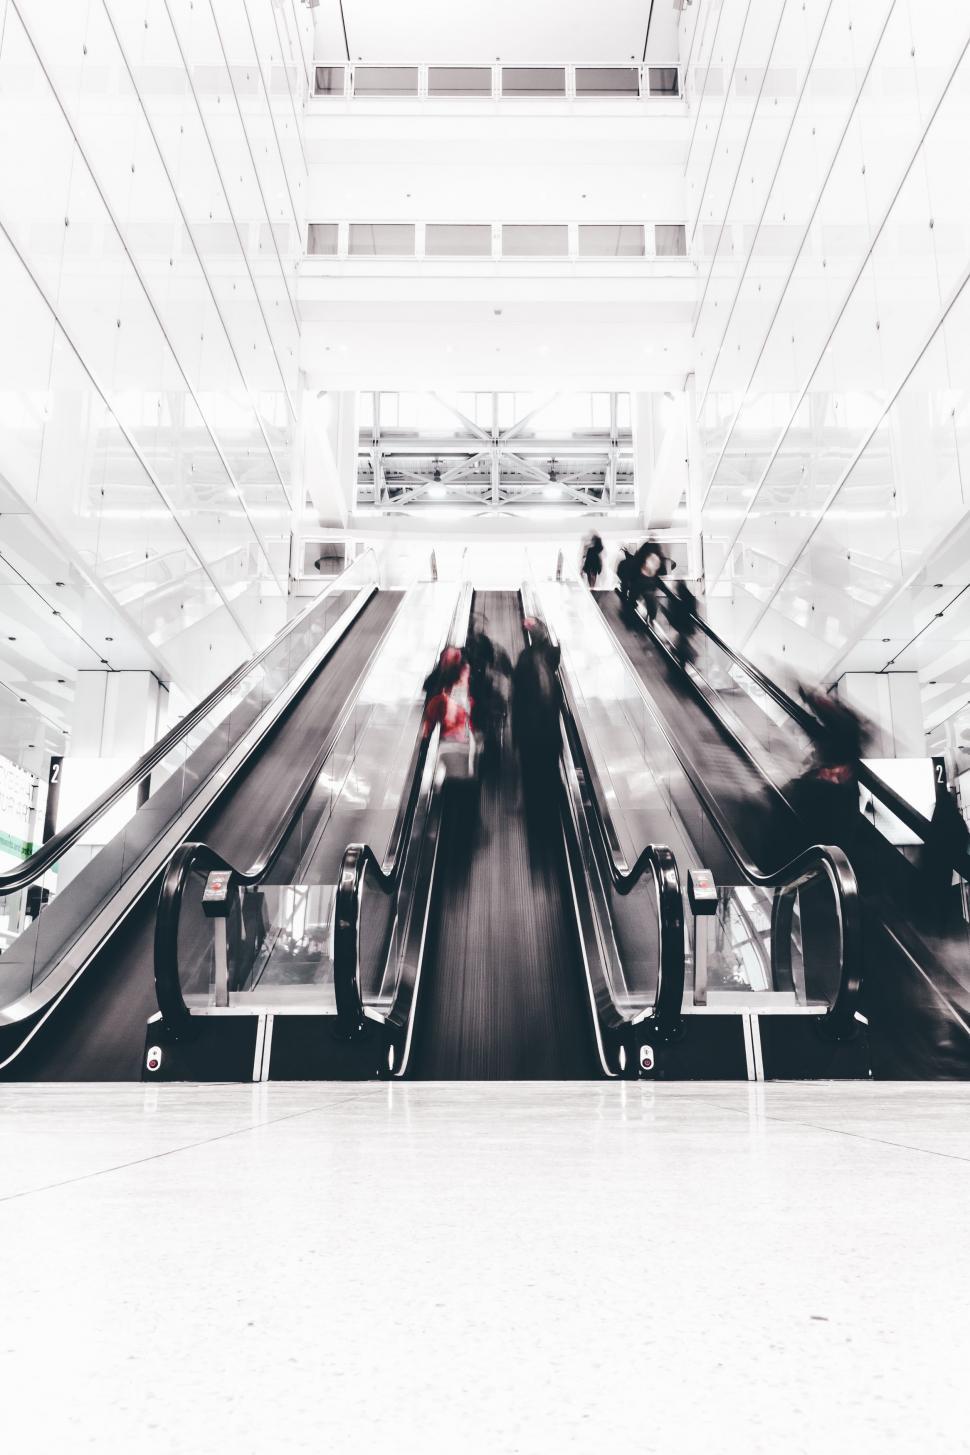 Free Image of Group of People Riding Down Escalator in Building 